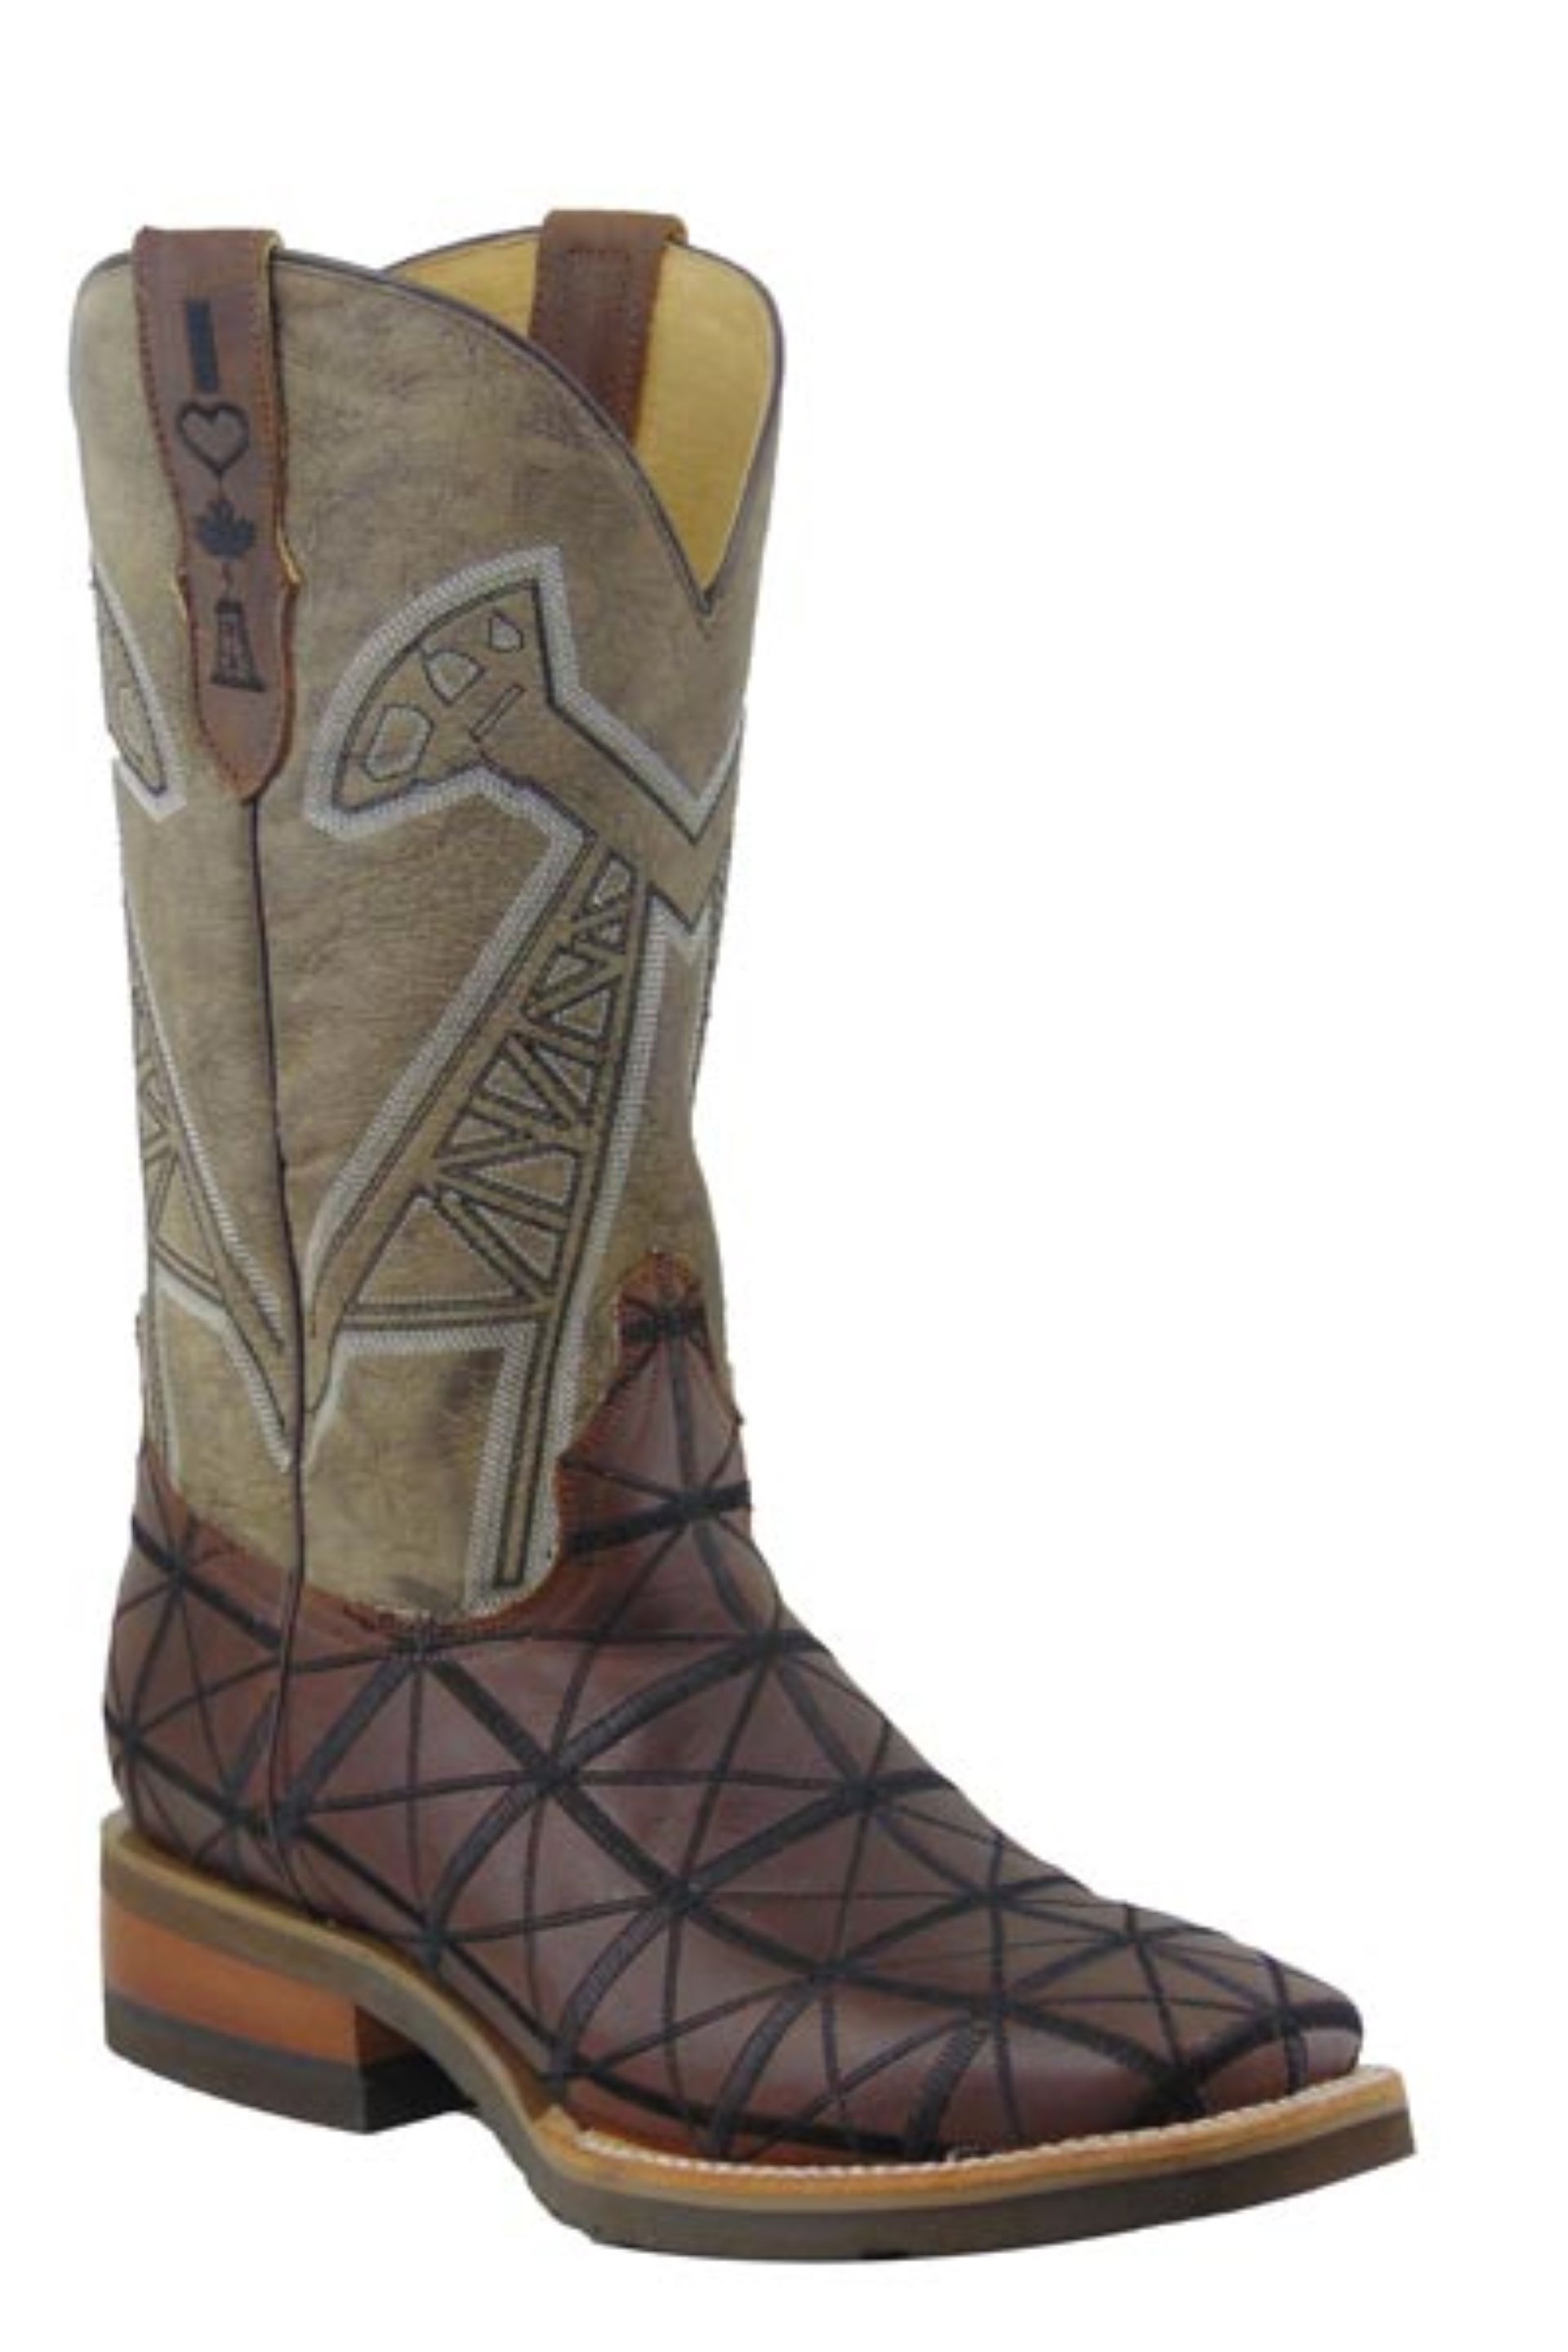 Men's Leather Western Boot - 09-020-7005-1431 BR